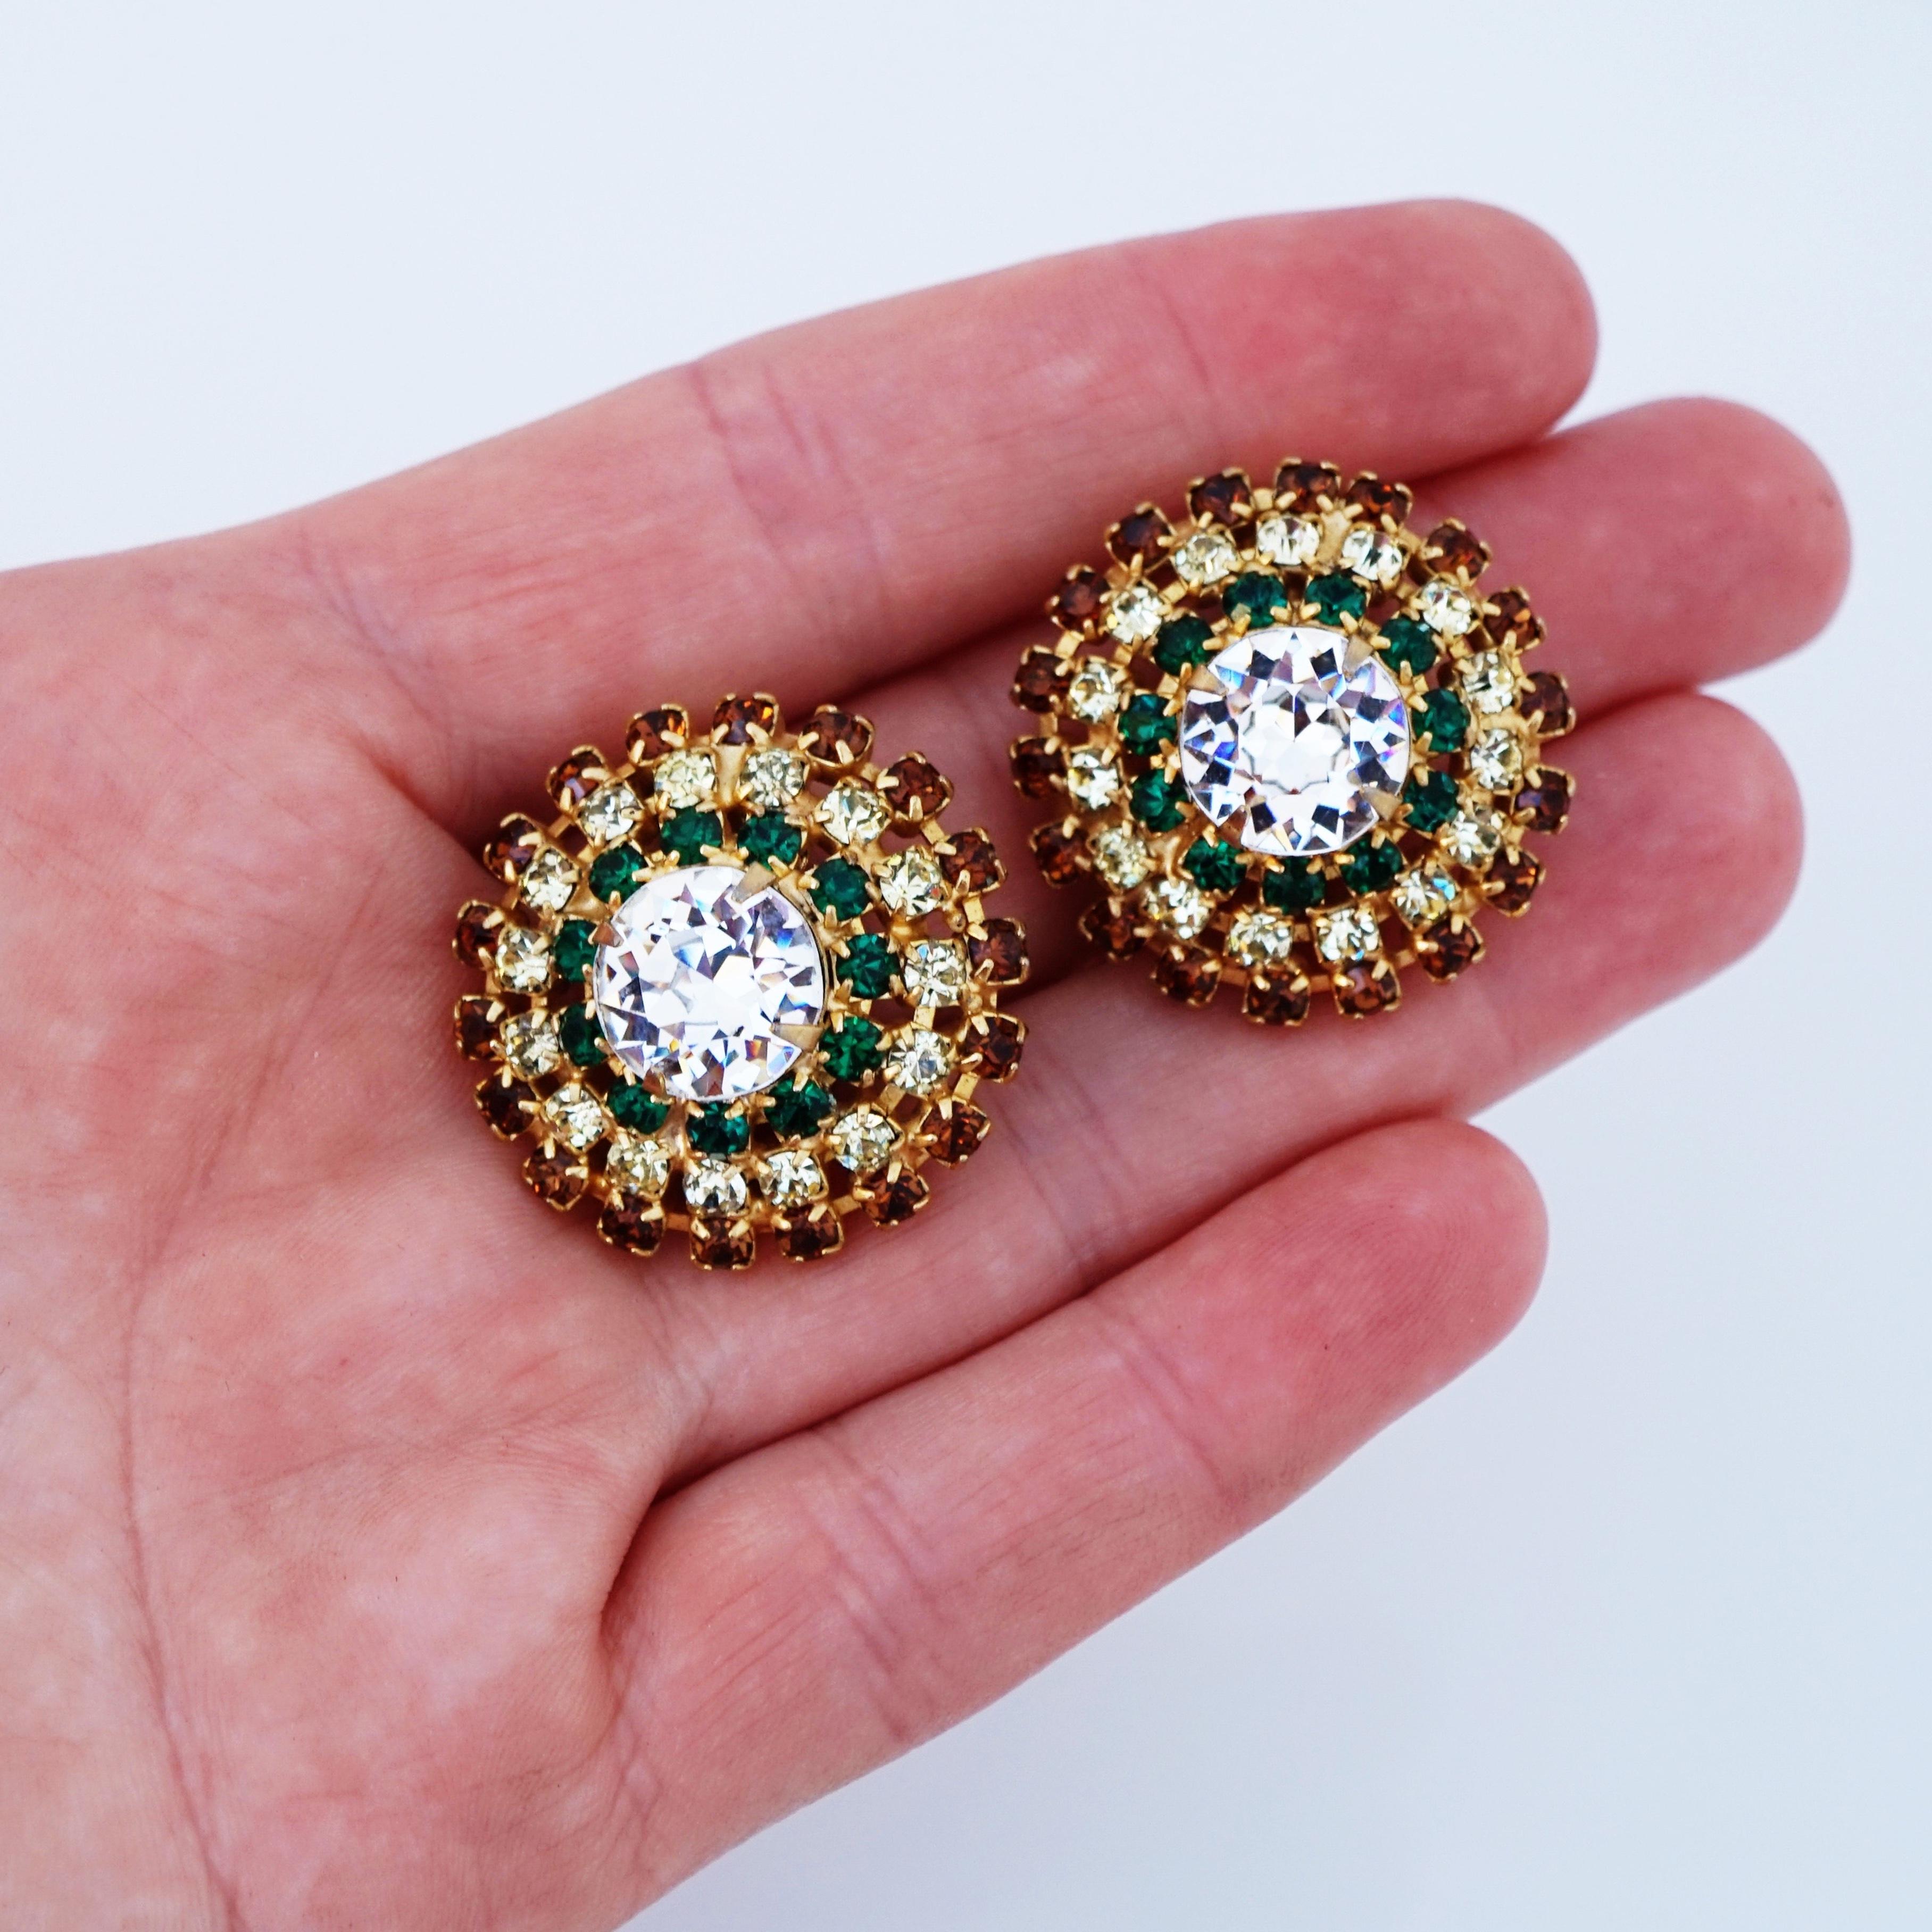 Smoked Topaz and Emerald Rhinestone Dome Earrings By Hobé, 1960s For Sale 1